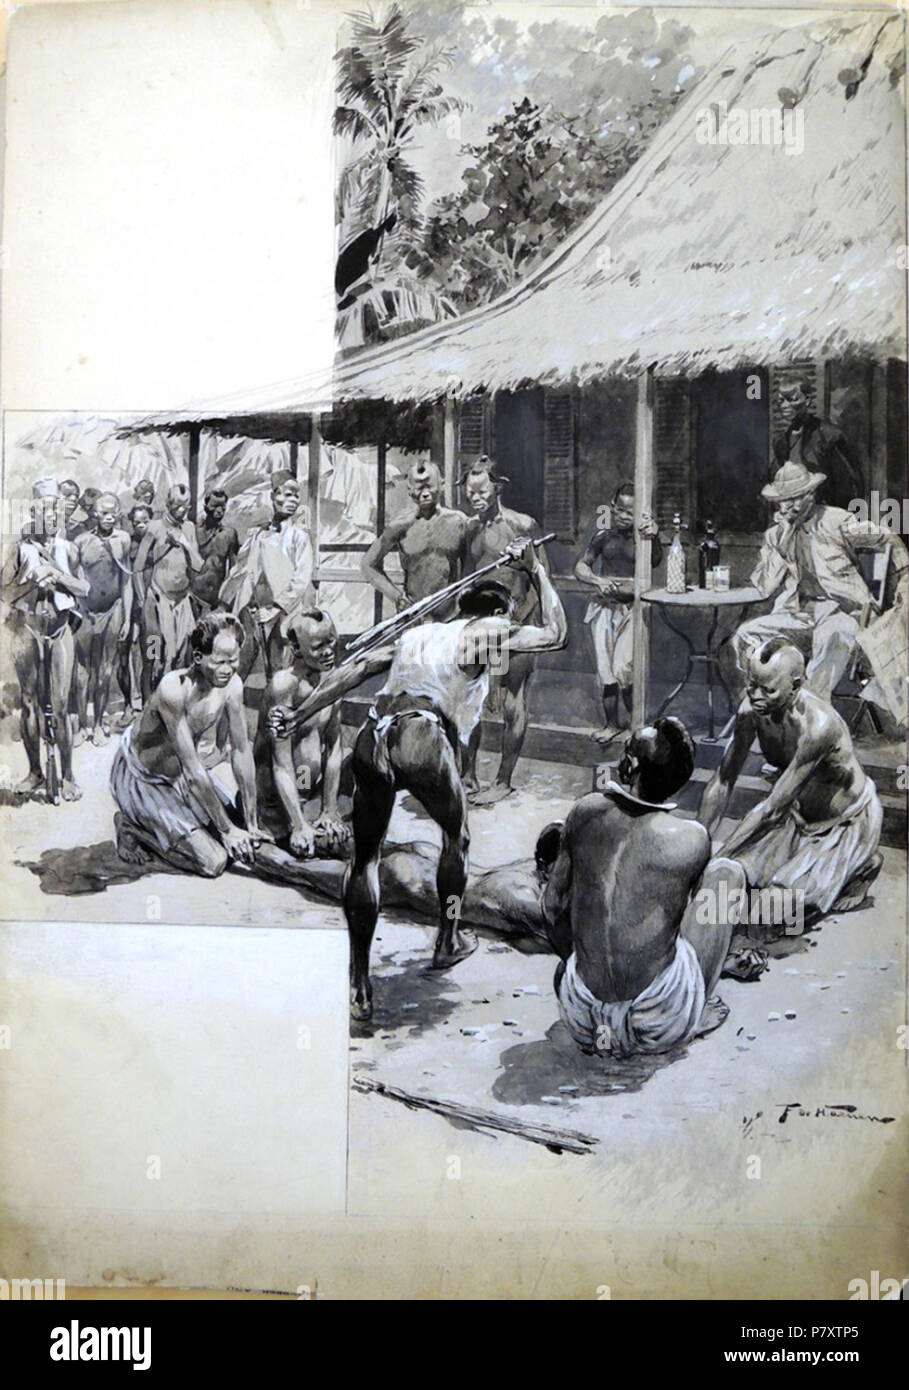 English: The Chicotte (The Whipping). Frederic de Haenen, Gouache and ink wash, January 1906. Graphic Arts Collection. 19 August 2015 163 Frederic de Haenen, How the White Man Trades in the Congo, 1906 Stock Photo